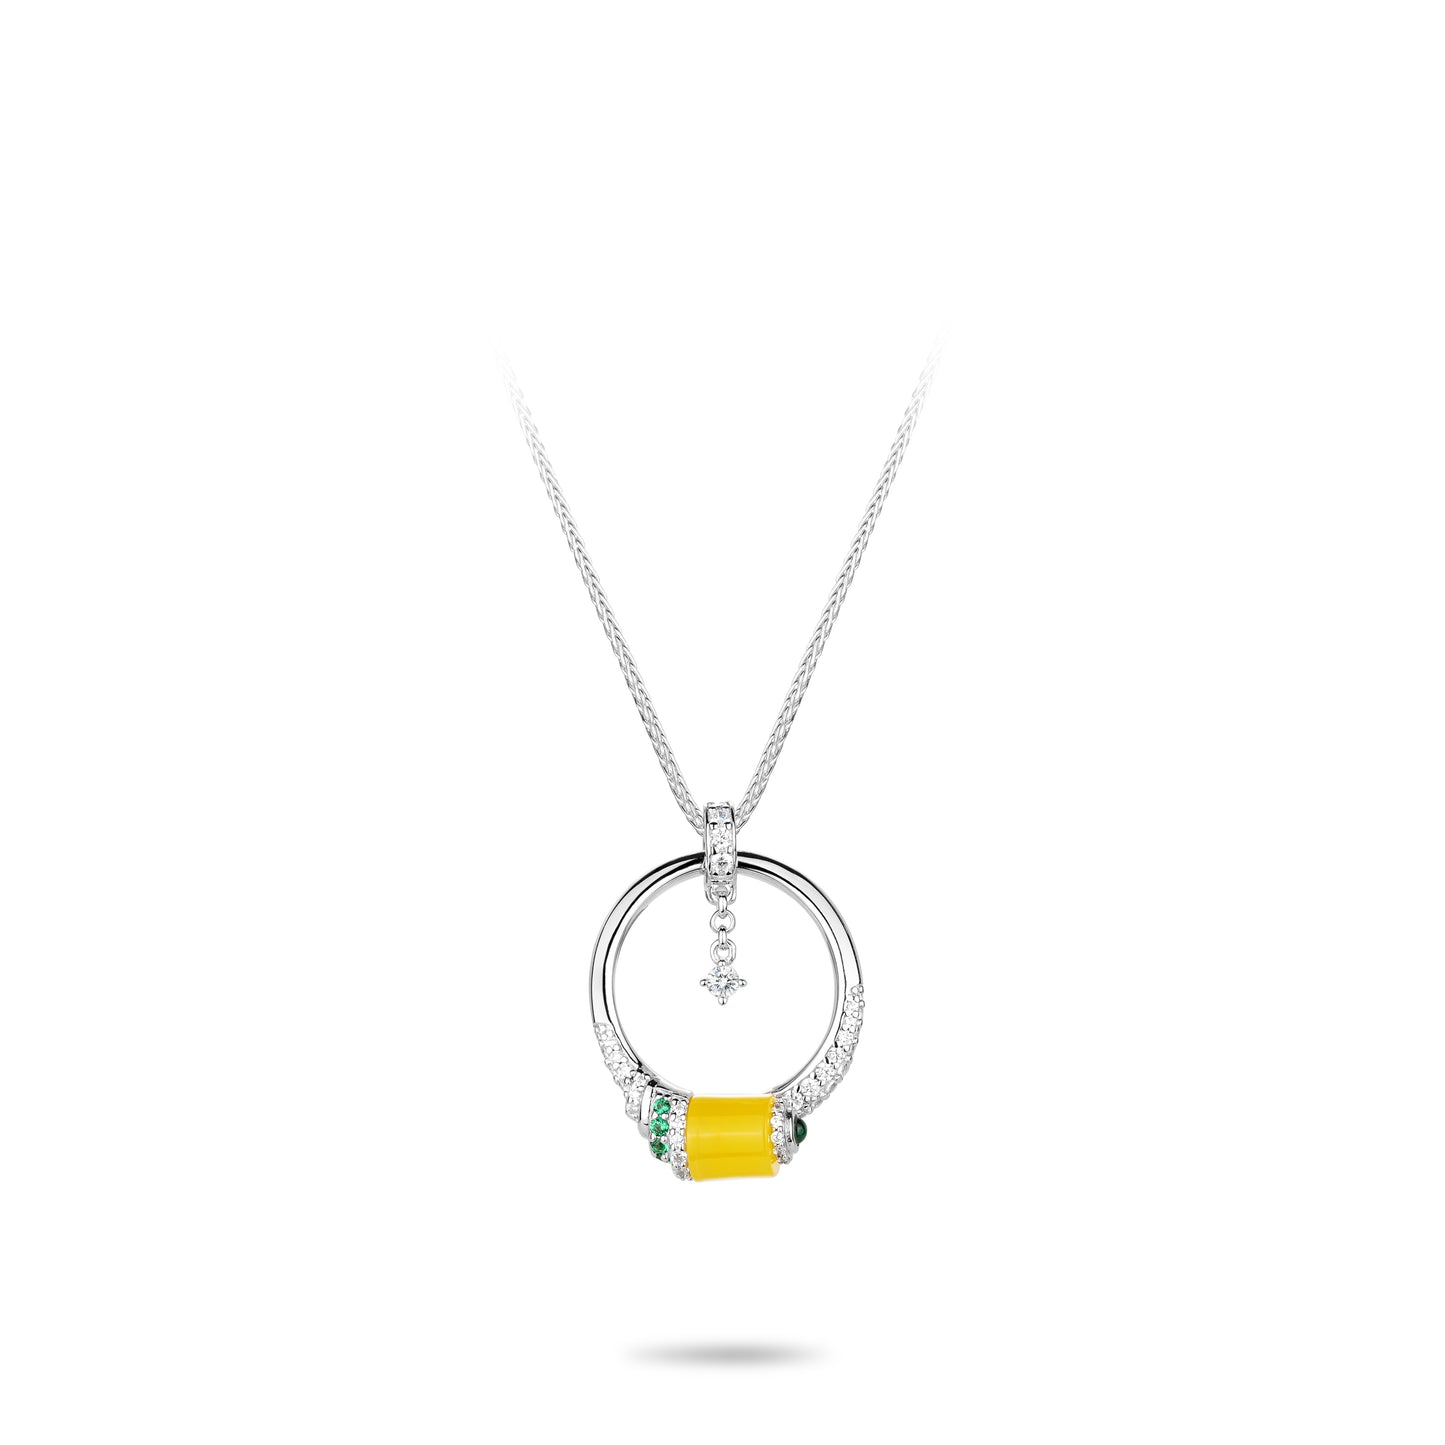 Welfare Exclusive: Modern Multi-purpose "LuLuTong" open Ring and Pendant